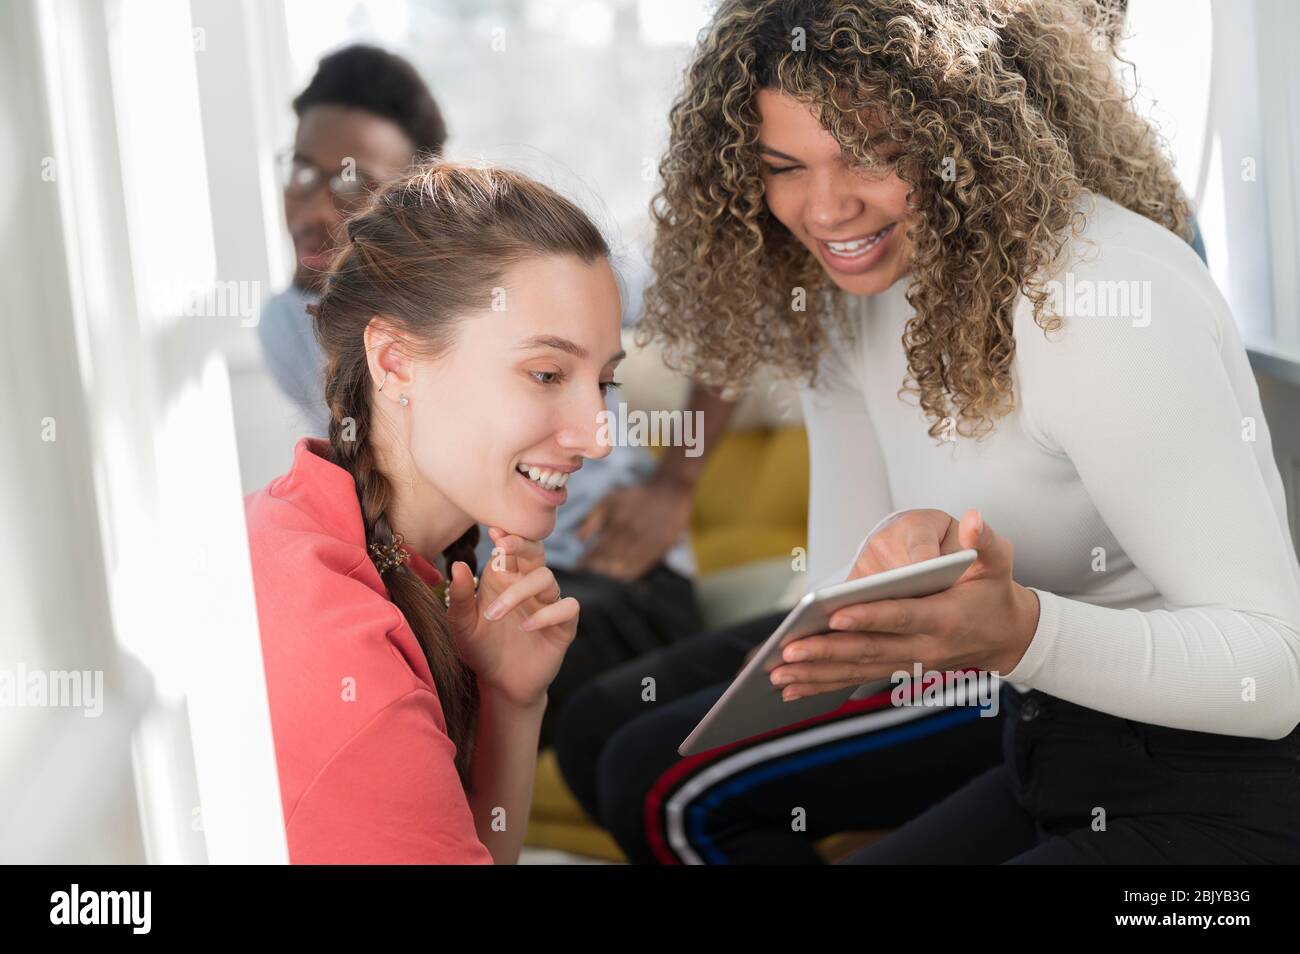 Woman showing her friend something on tabletÂ Stock Photo